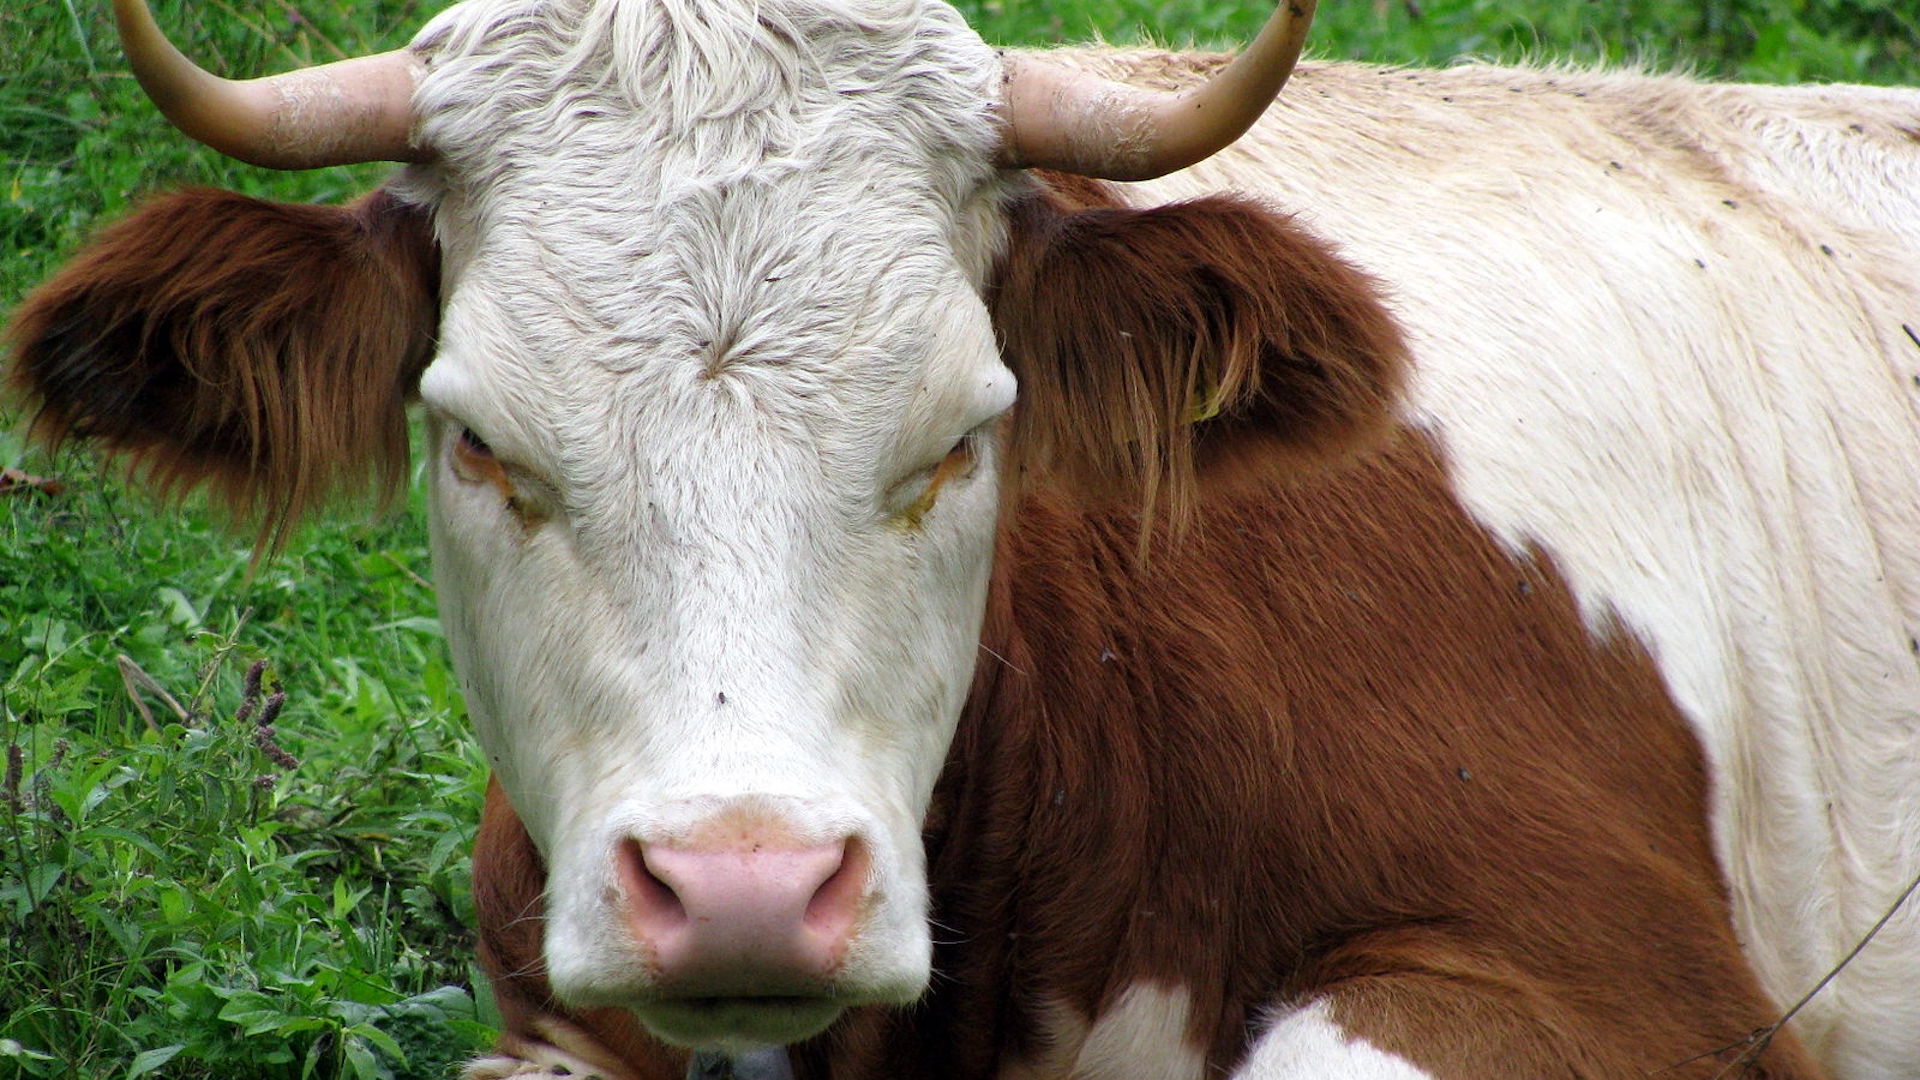 a photograph of a brown and white cow with horns sitting in grass